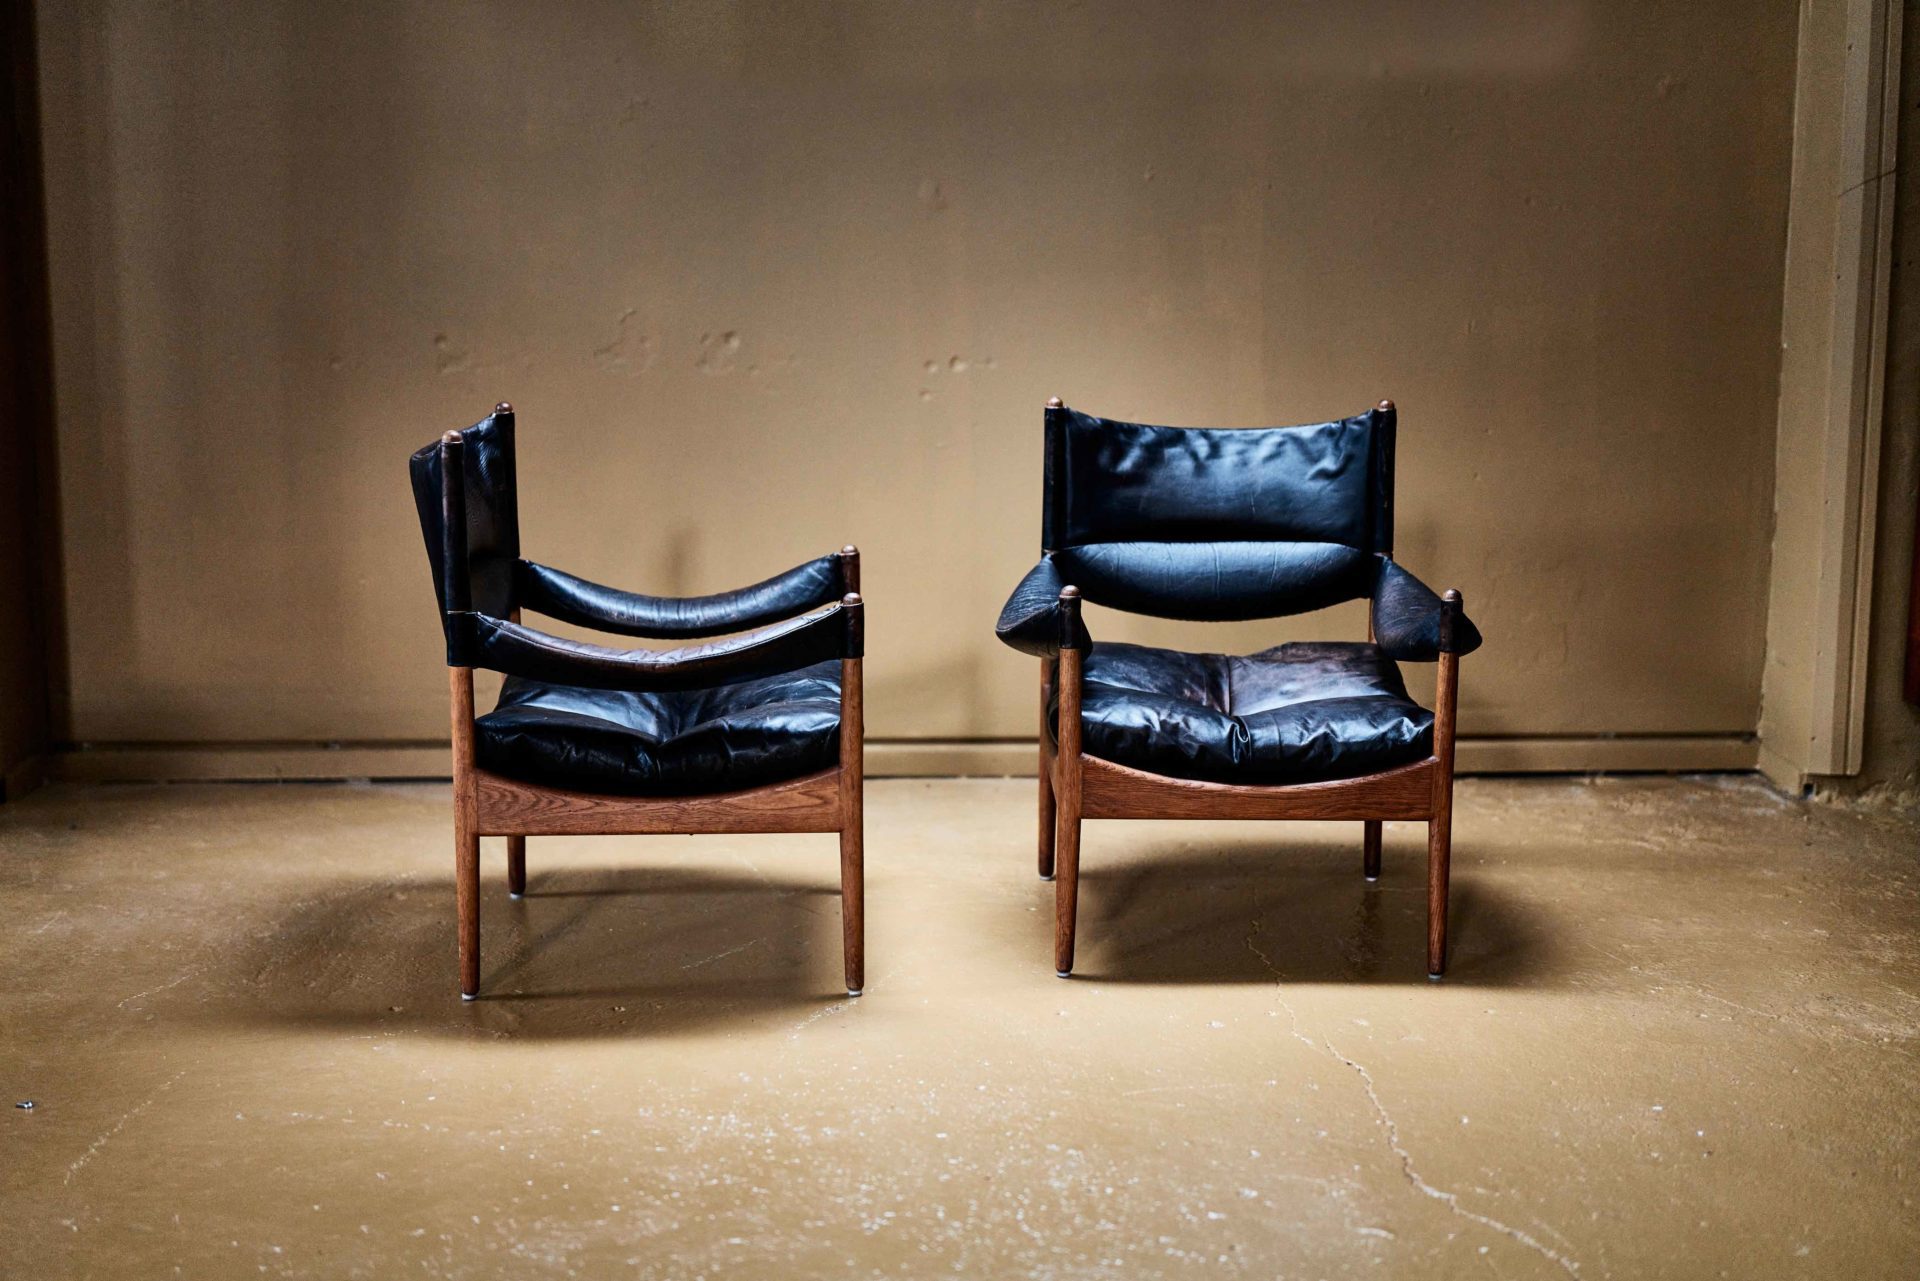 Two black and timber chairs